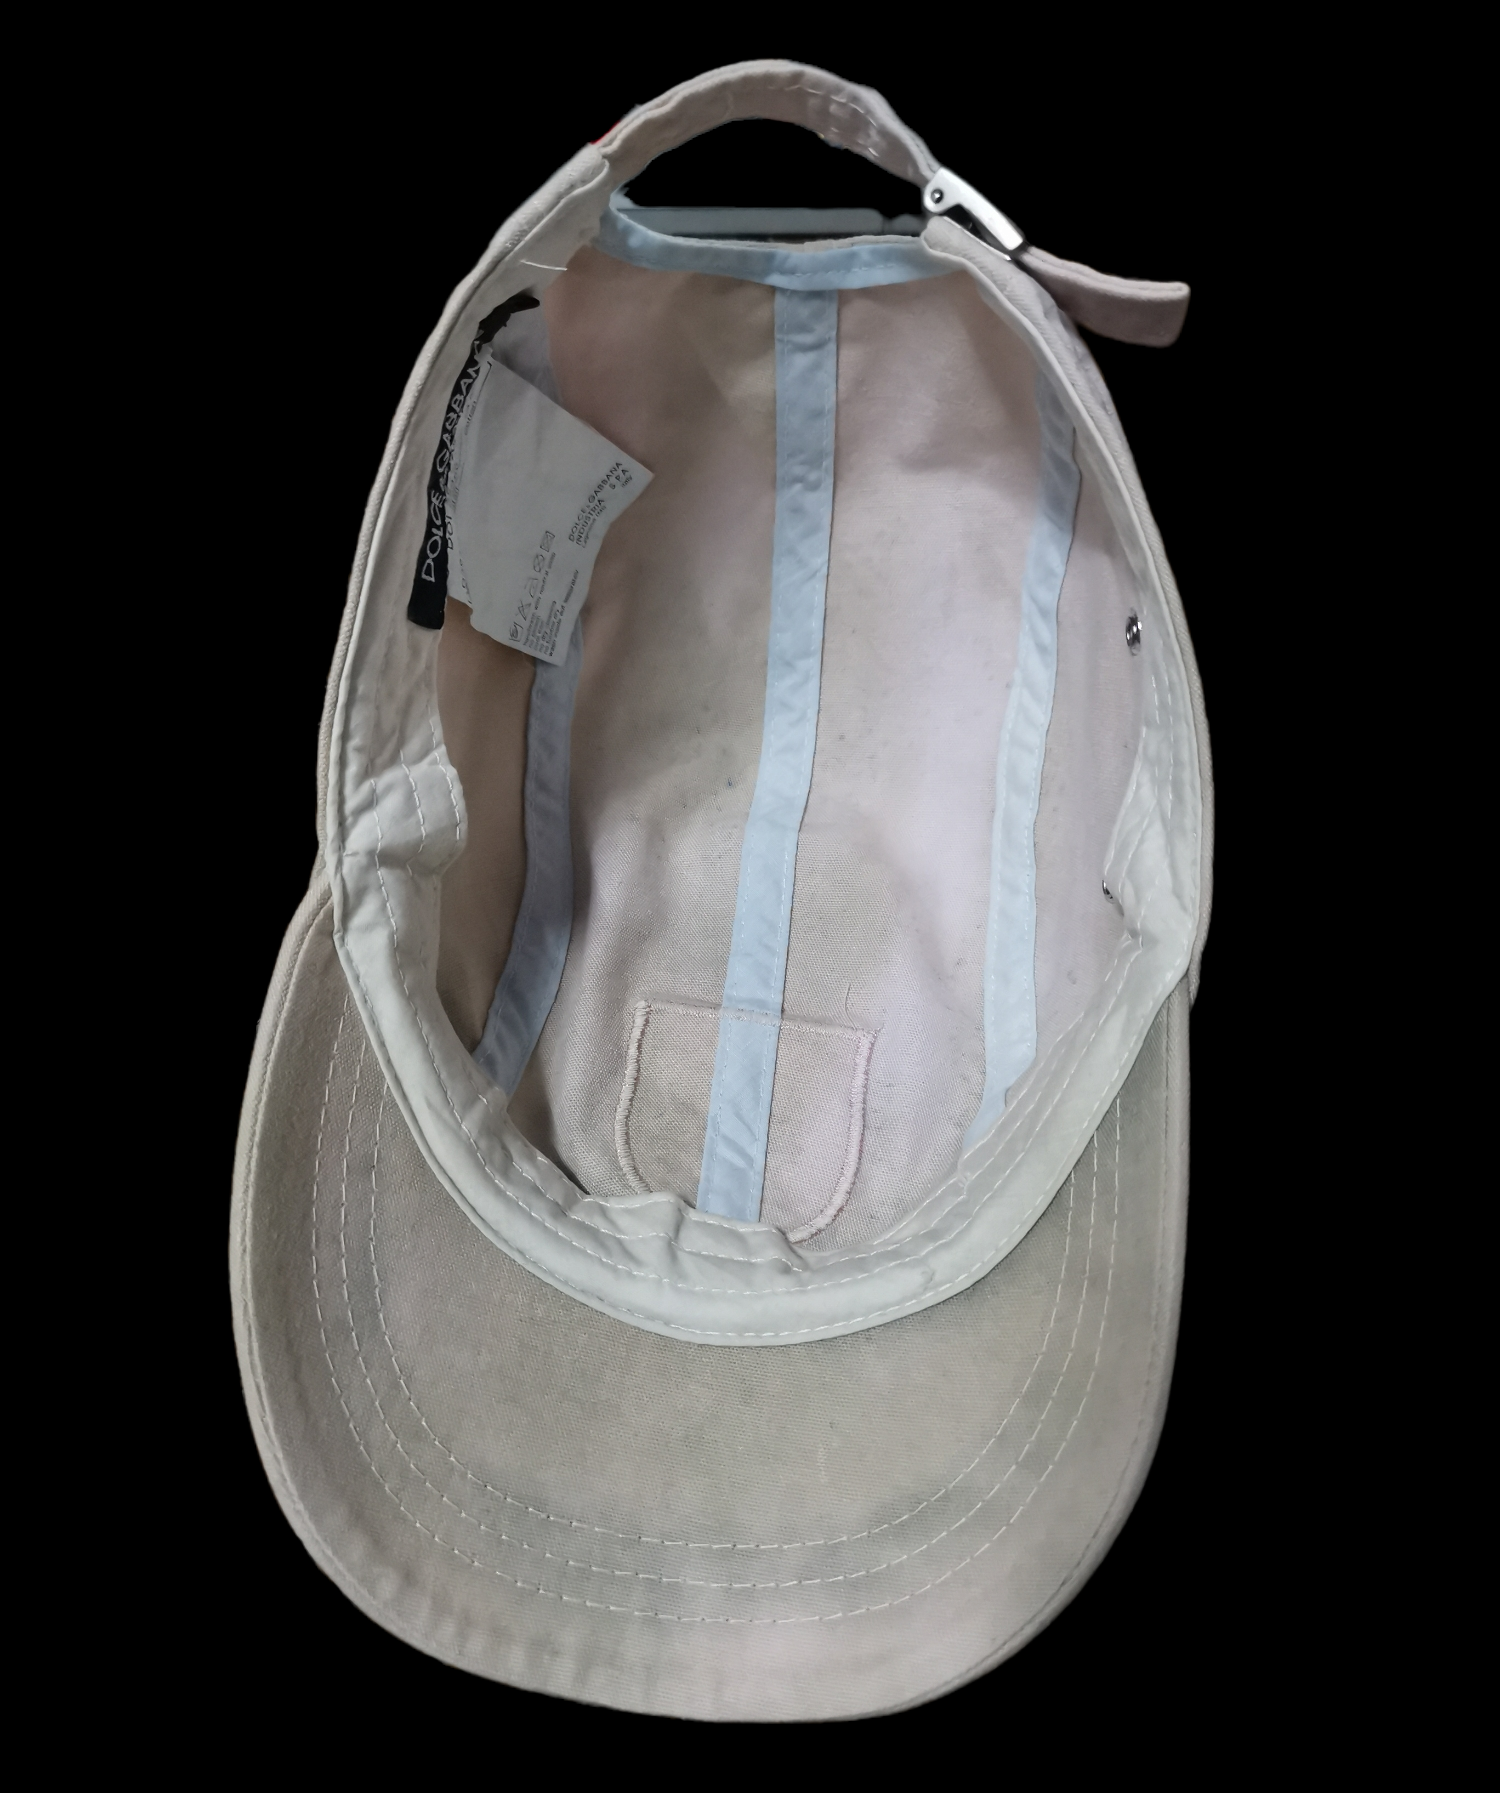 🔥Luxury🔥Dolce & Gabbana Hats Dirty & Stain - For Fashion - 6